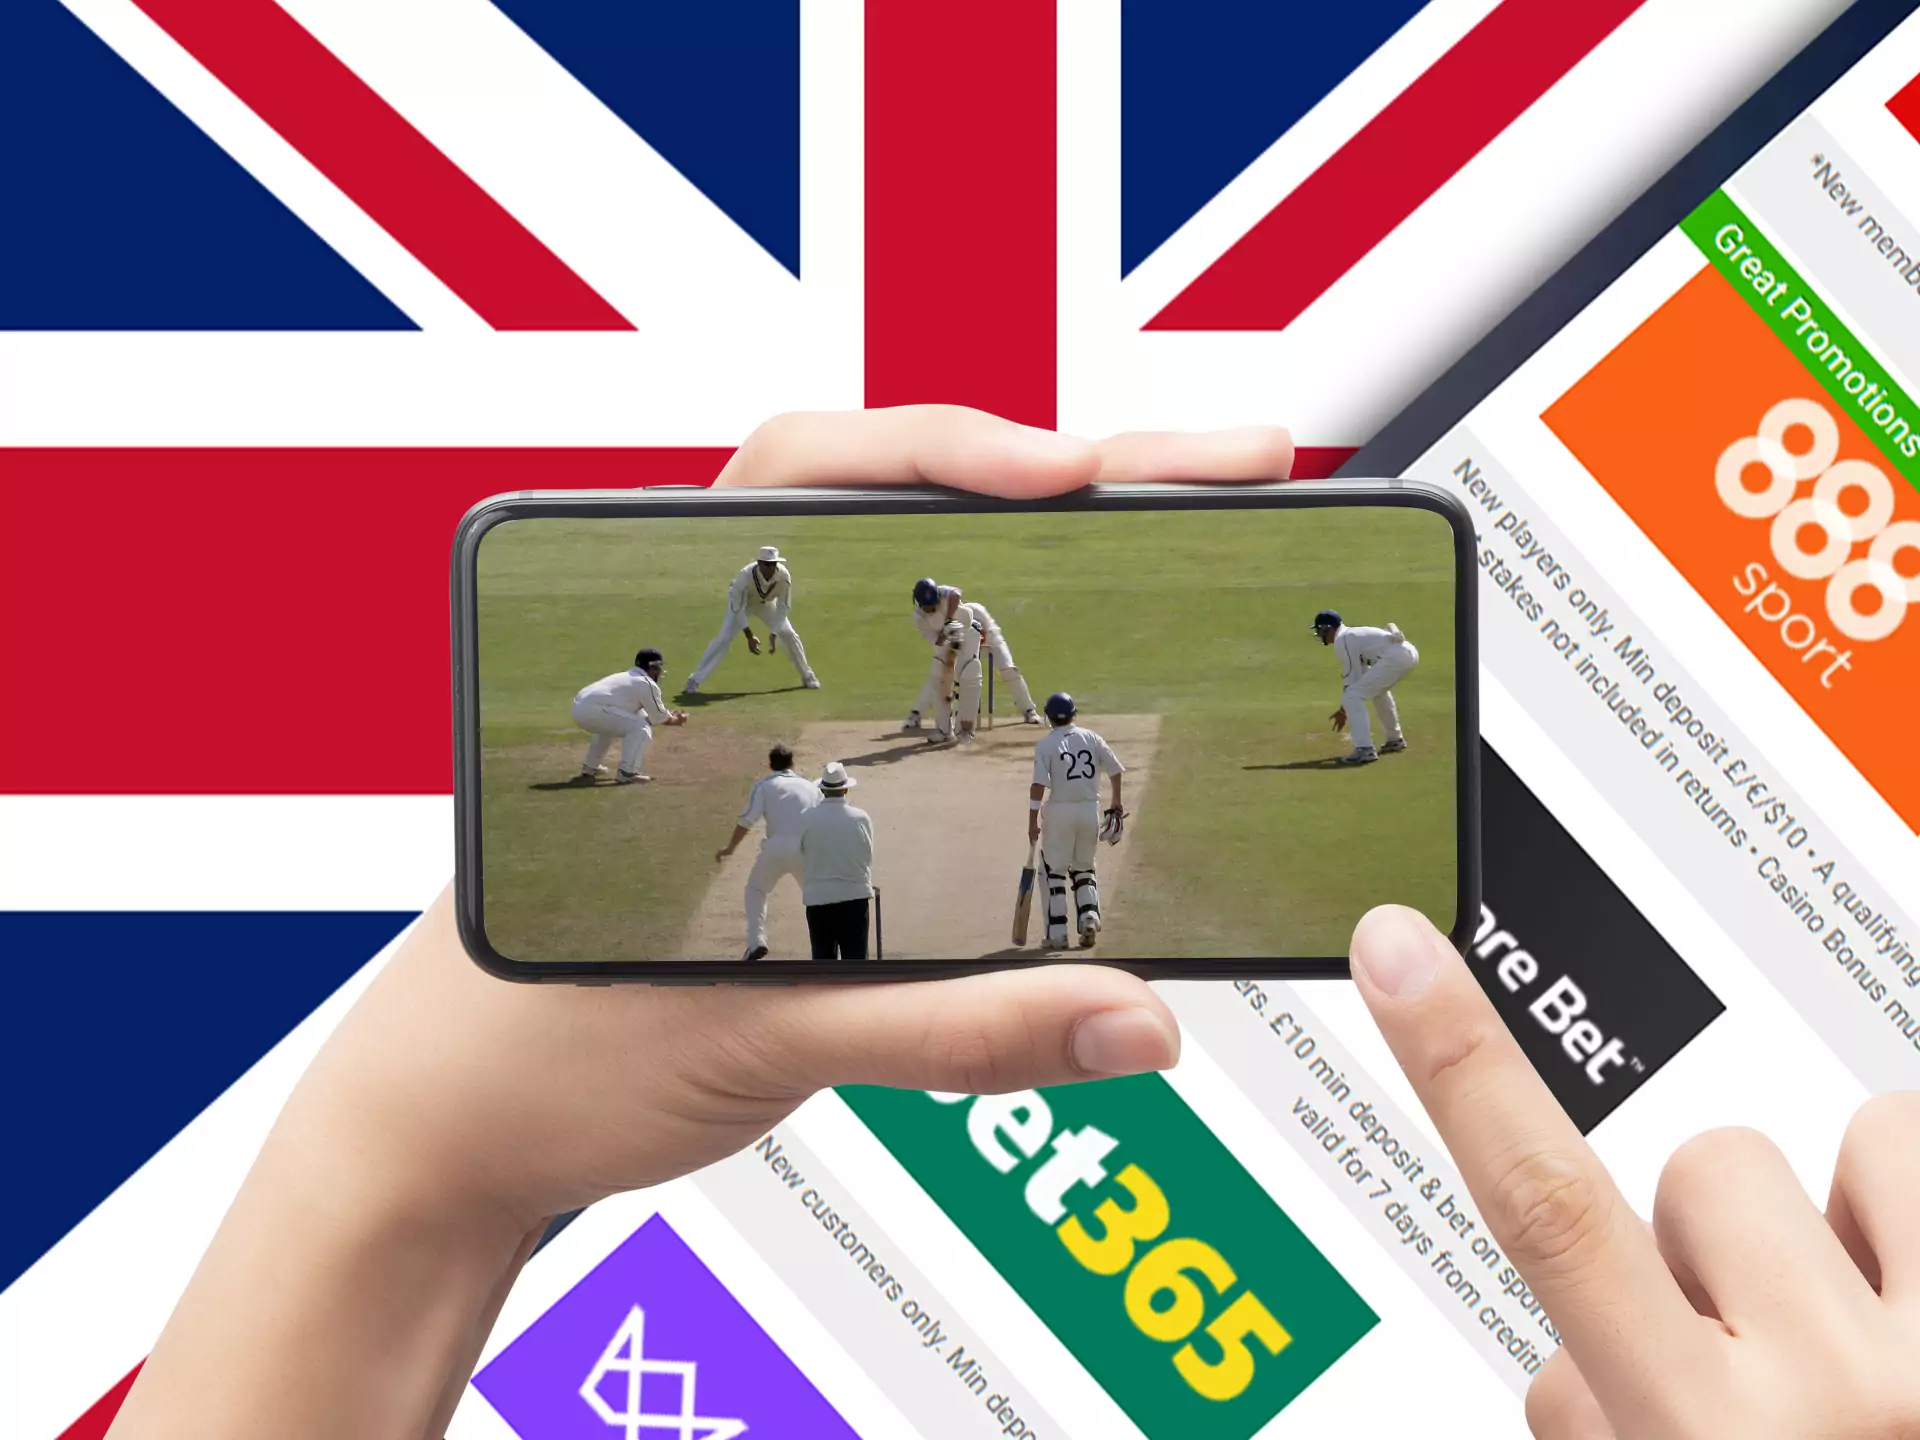 UK users can bet on cricket on bookmakers' websites and apps.